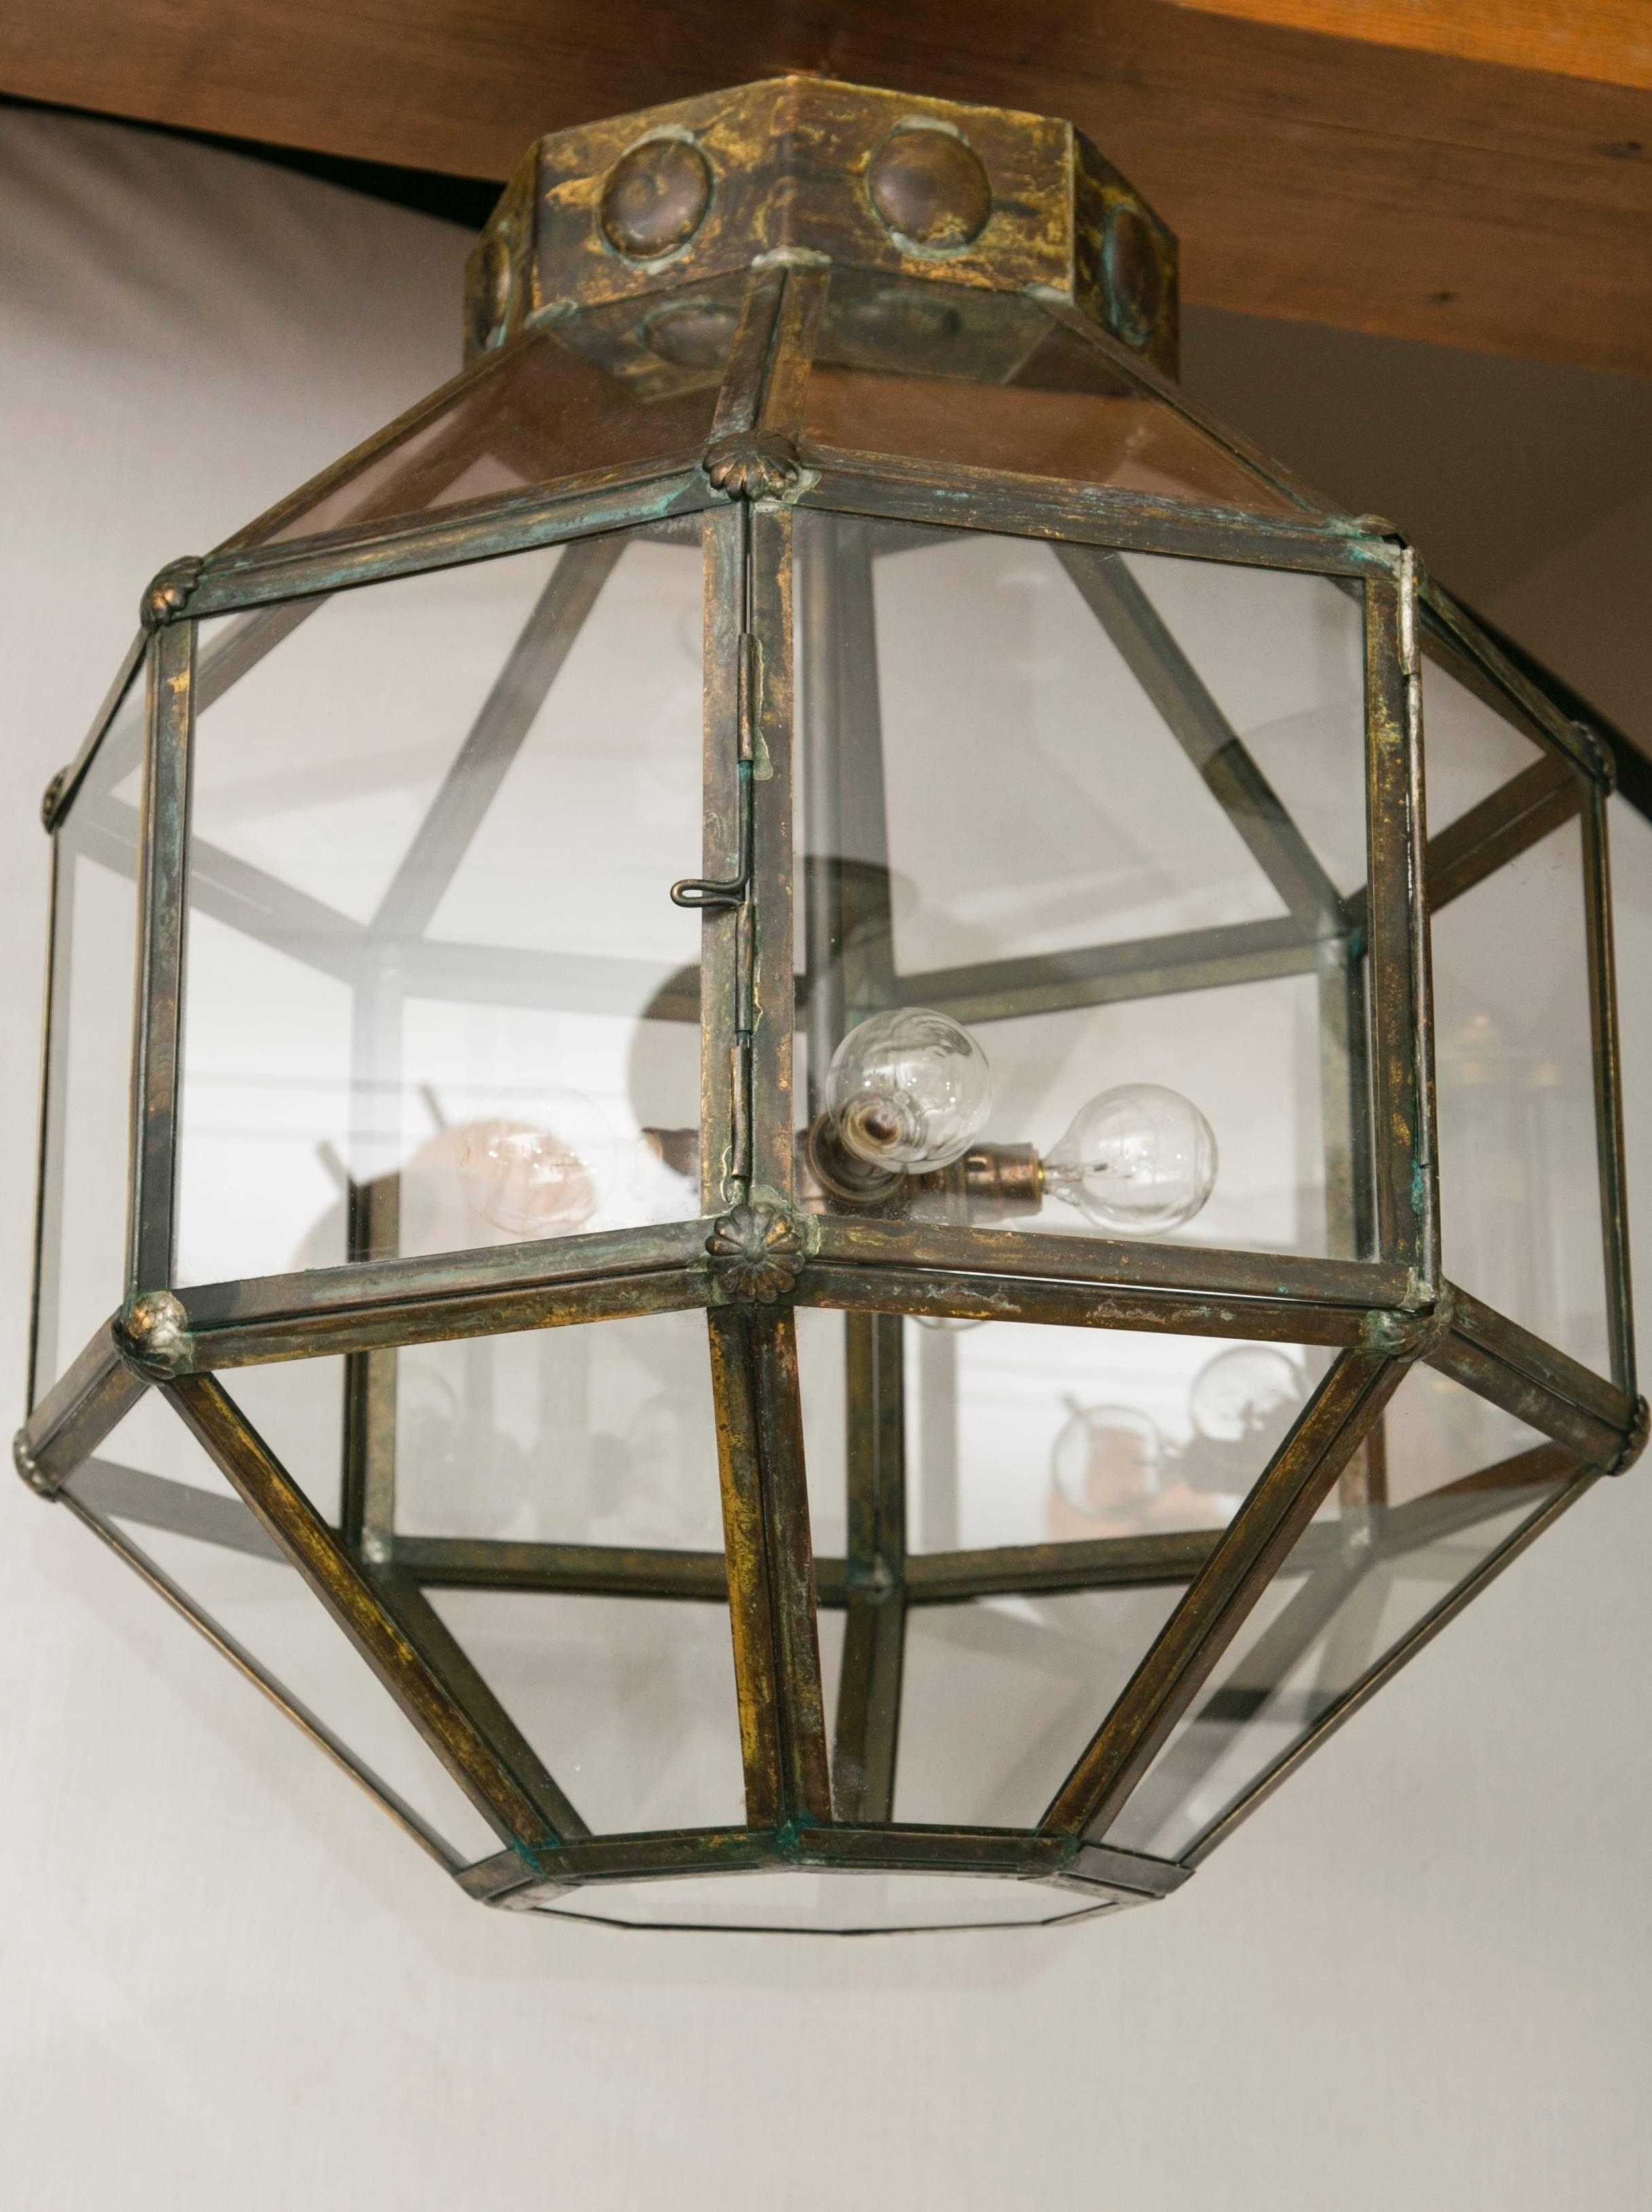 Minimalistic pair of antiqued brass octagonal lanterns recently illuminated with five light interior chandelier
can be installed with three smaller chains or a larger single chain with canopy.